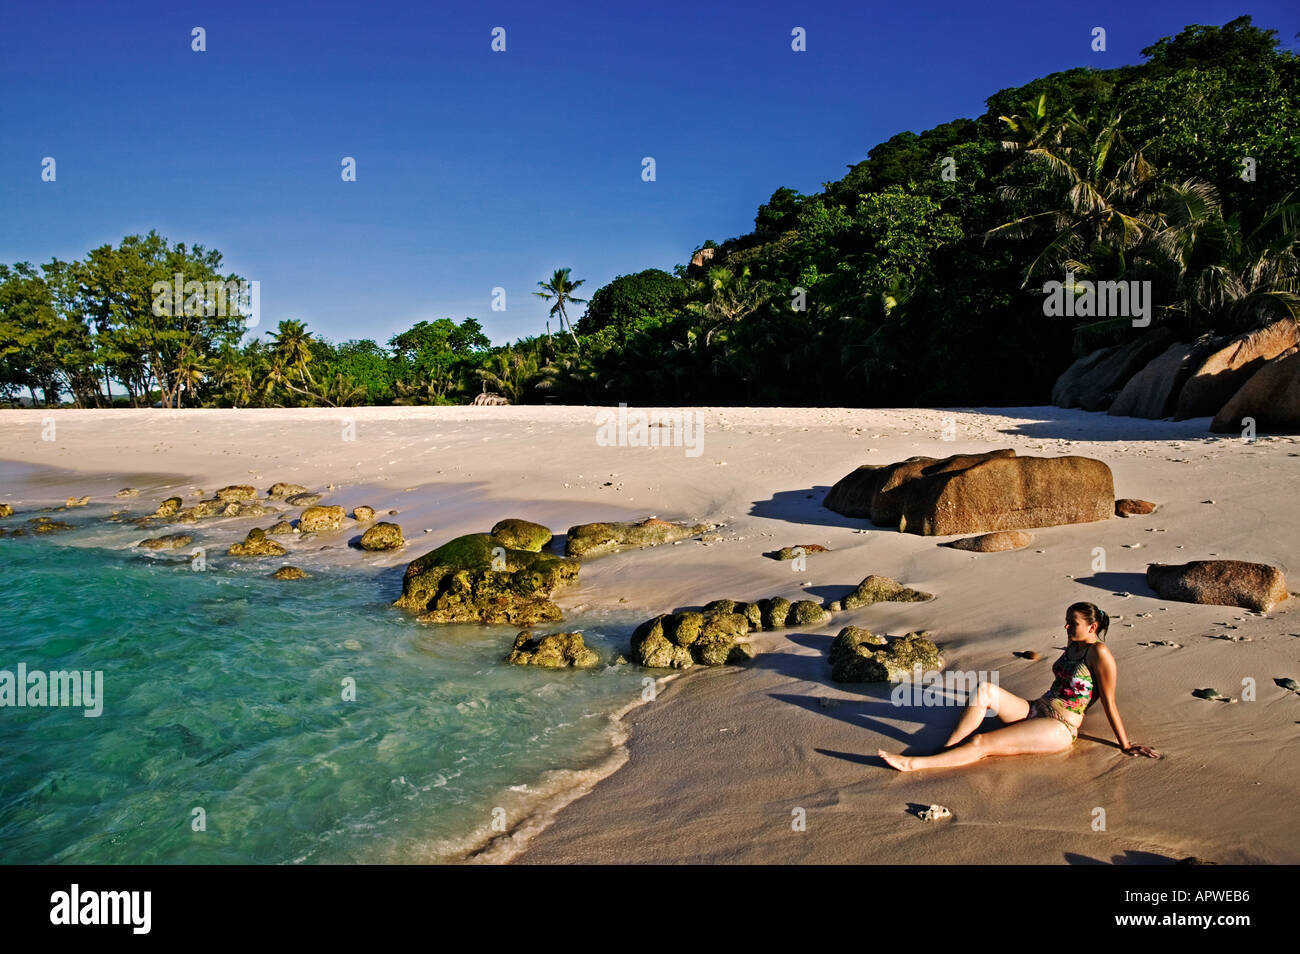 Woman relaxing on beach Seychelles Cousine Island Banque D'Images